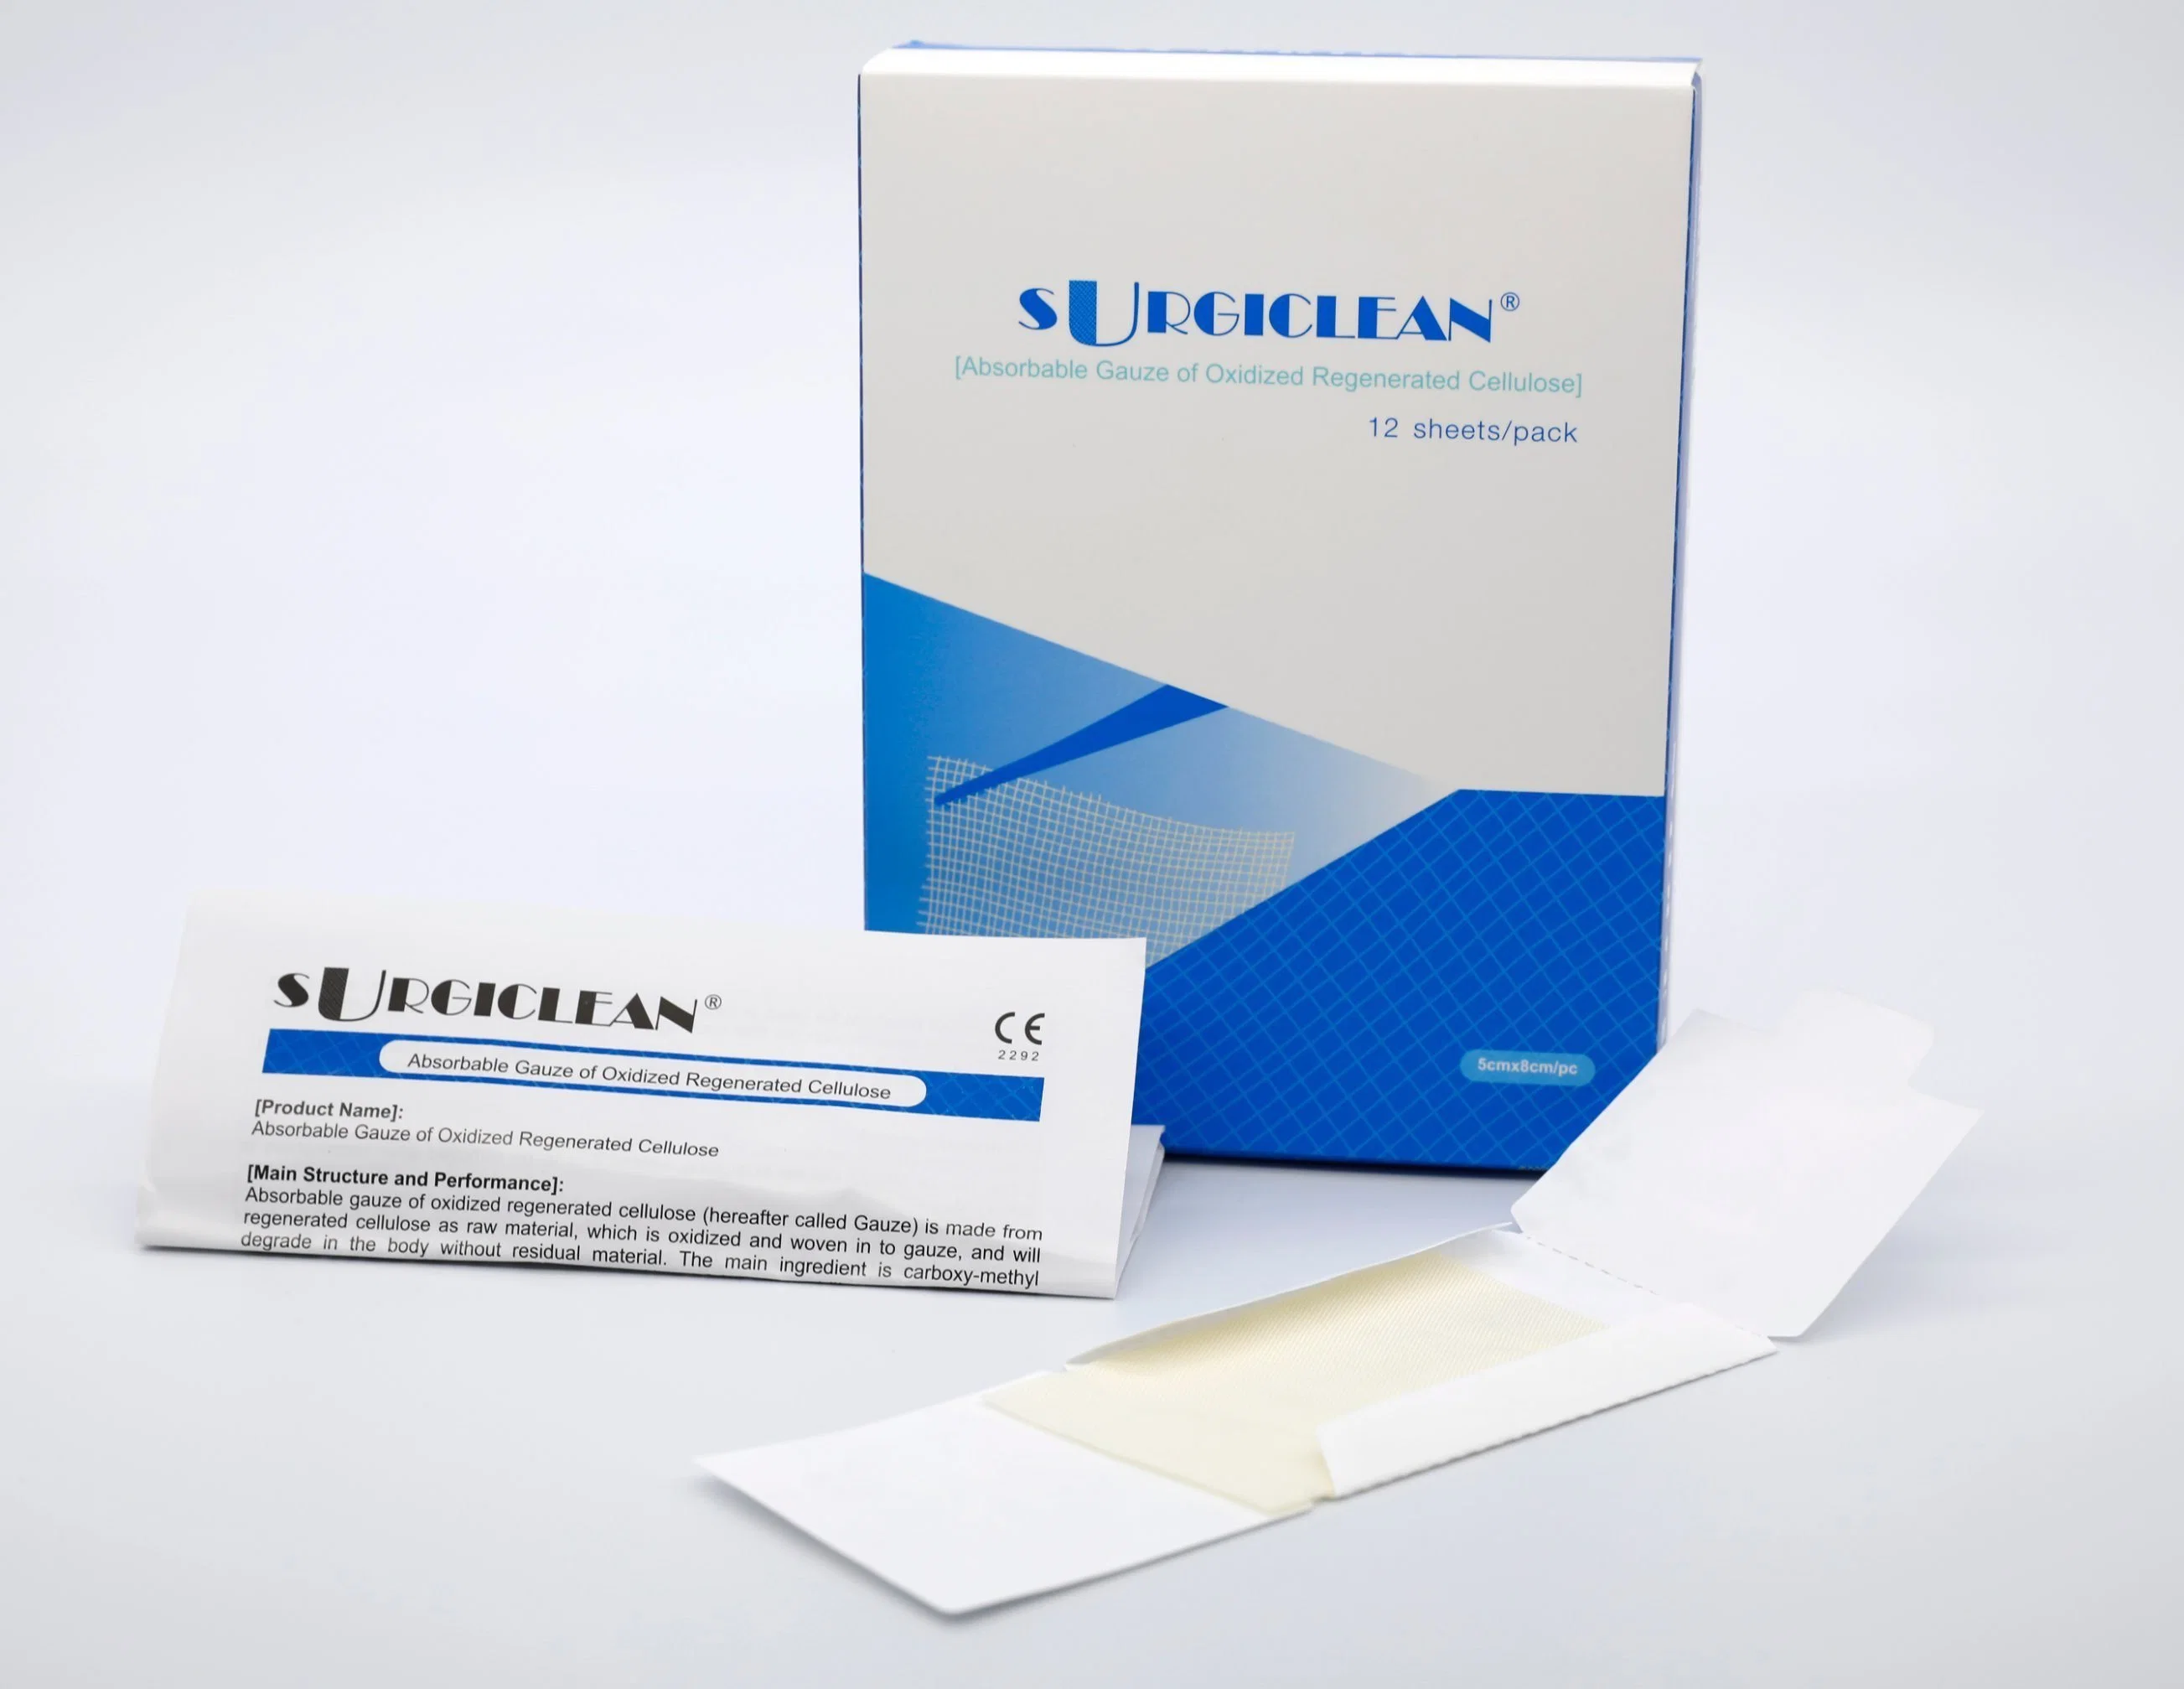 Regenerated Cellulose Surgical Supplies Materials Burn Wound Care Hemostatic Absorbable Gauze